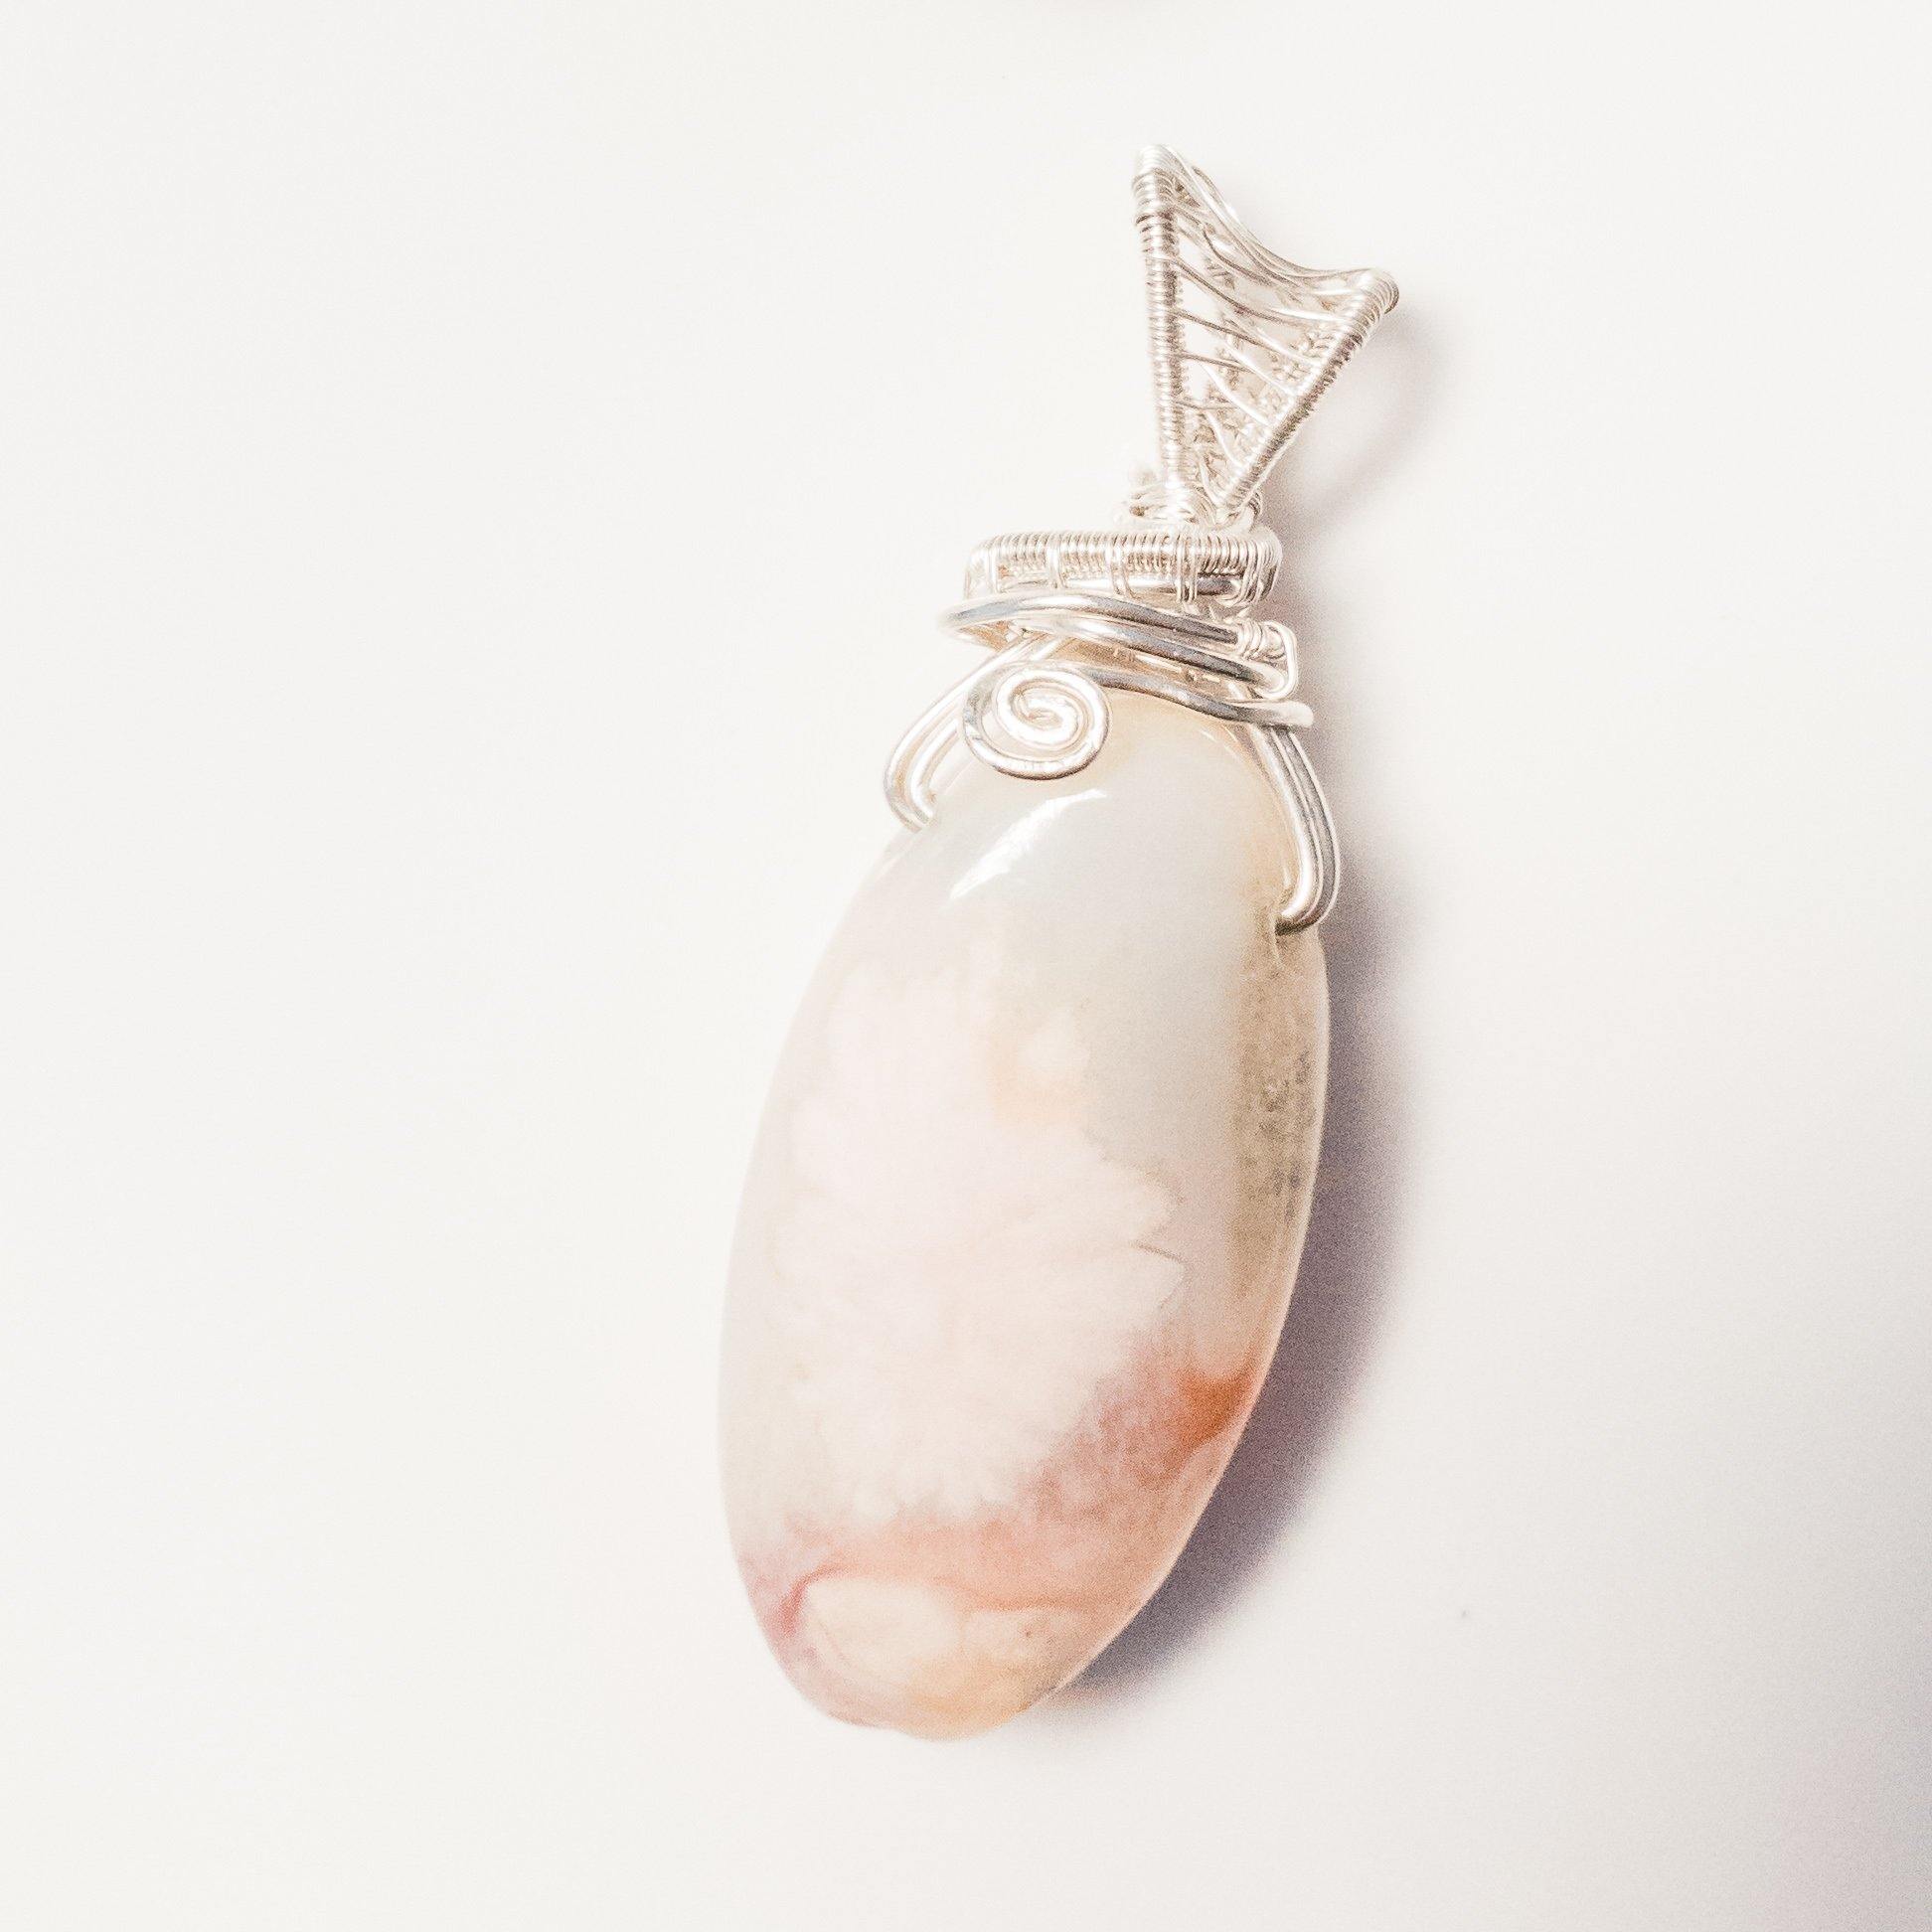 Natural Cherry Blossom Agate in Sterling Silver front view - BellaChel Jeweler